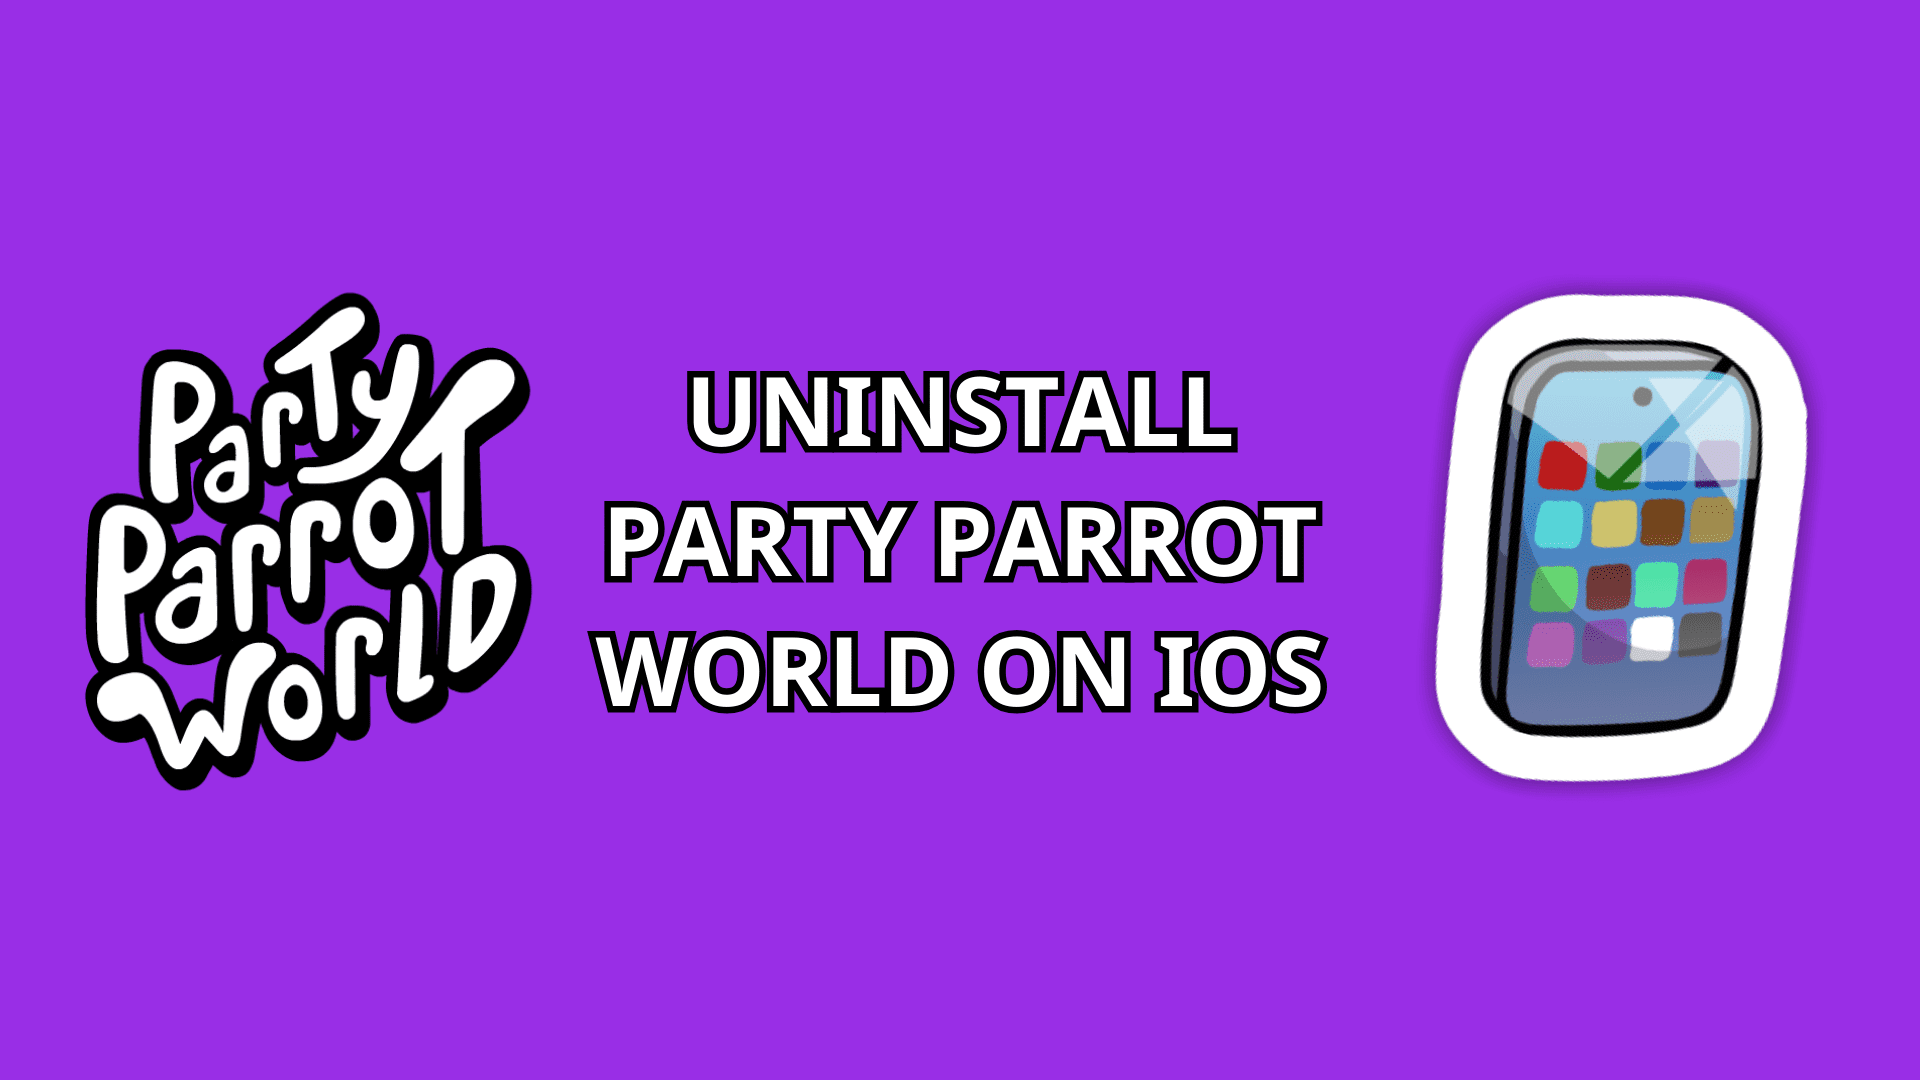 Uninstall Party Parrot World on iOS text with Party Parrot World logo and silver smartphone icon